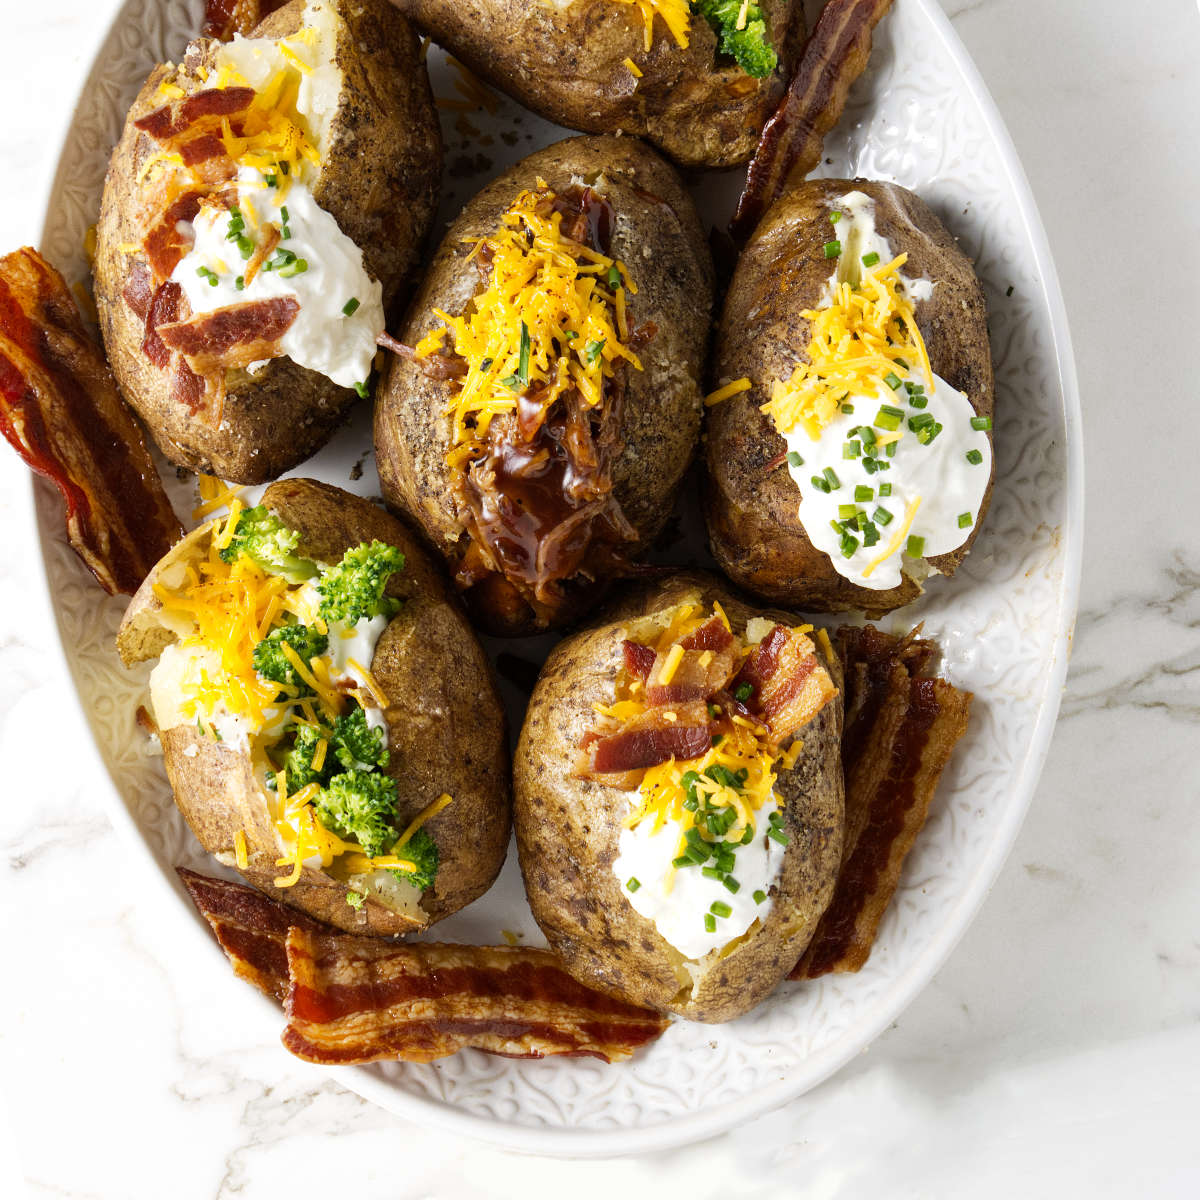 A serving platter filled with six loaded baked potatoes.